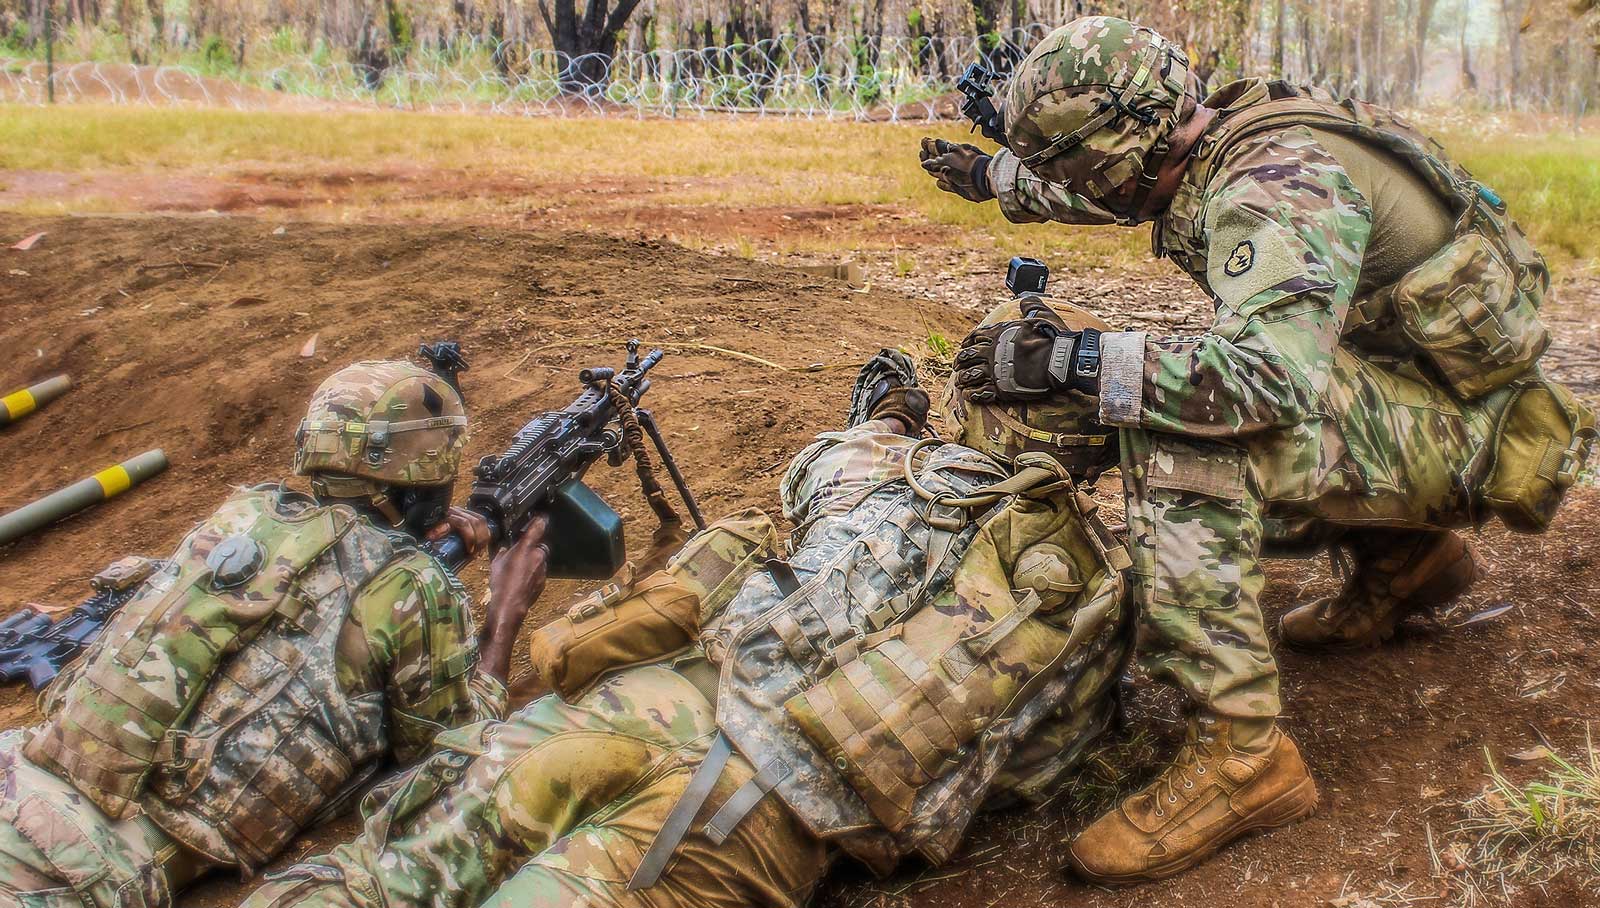 Image: U.S. Army 1st Lt. Thomas H. Tockarshewsky assigned to Alpha Company, 2nd Infantry Brigade Combat Team, 25th Infantry Division, gives guidance to his grappling man during a combined arms live-fire exercise at Schofield Barracks, Hawaii, June 24, 2020. The exercise is part of an overall training progression in order to maintain combat readiness in preparation for a Joint Readiness Training Center rotation later this year. (U.S. Army photo by 1st Sgt. Lekendrick Stallworth)